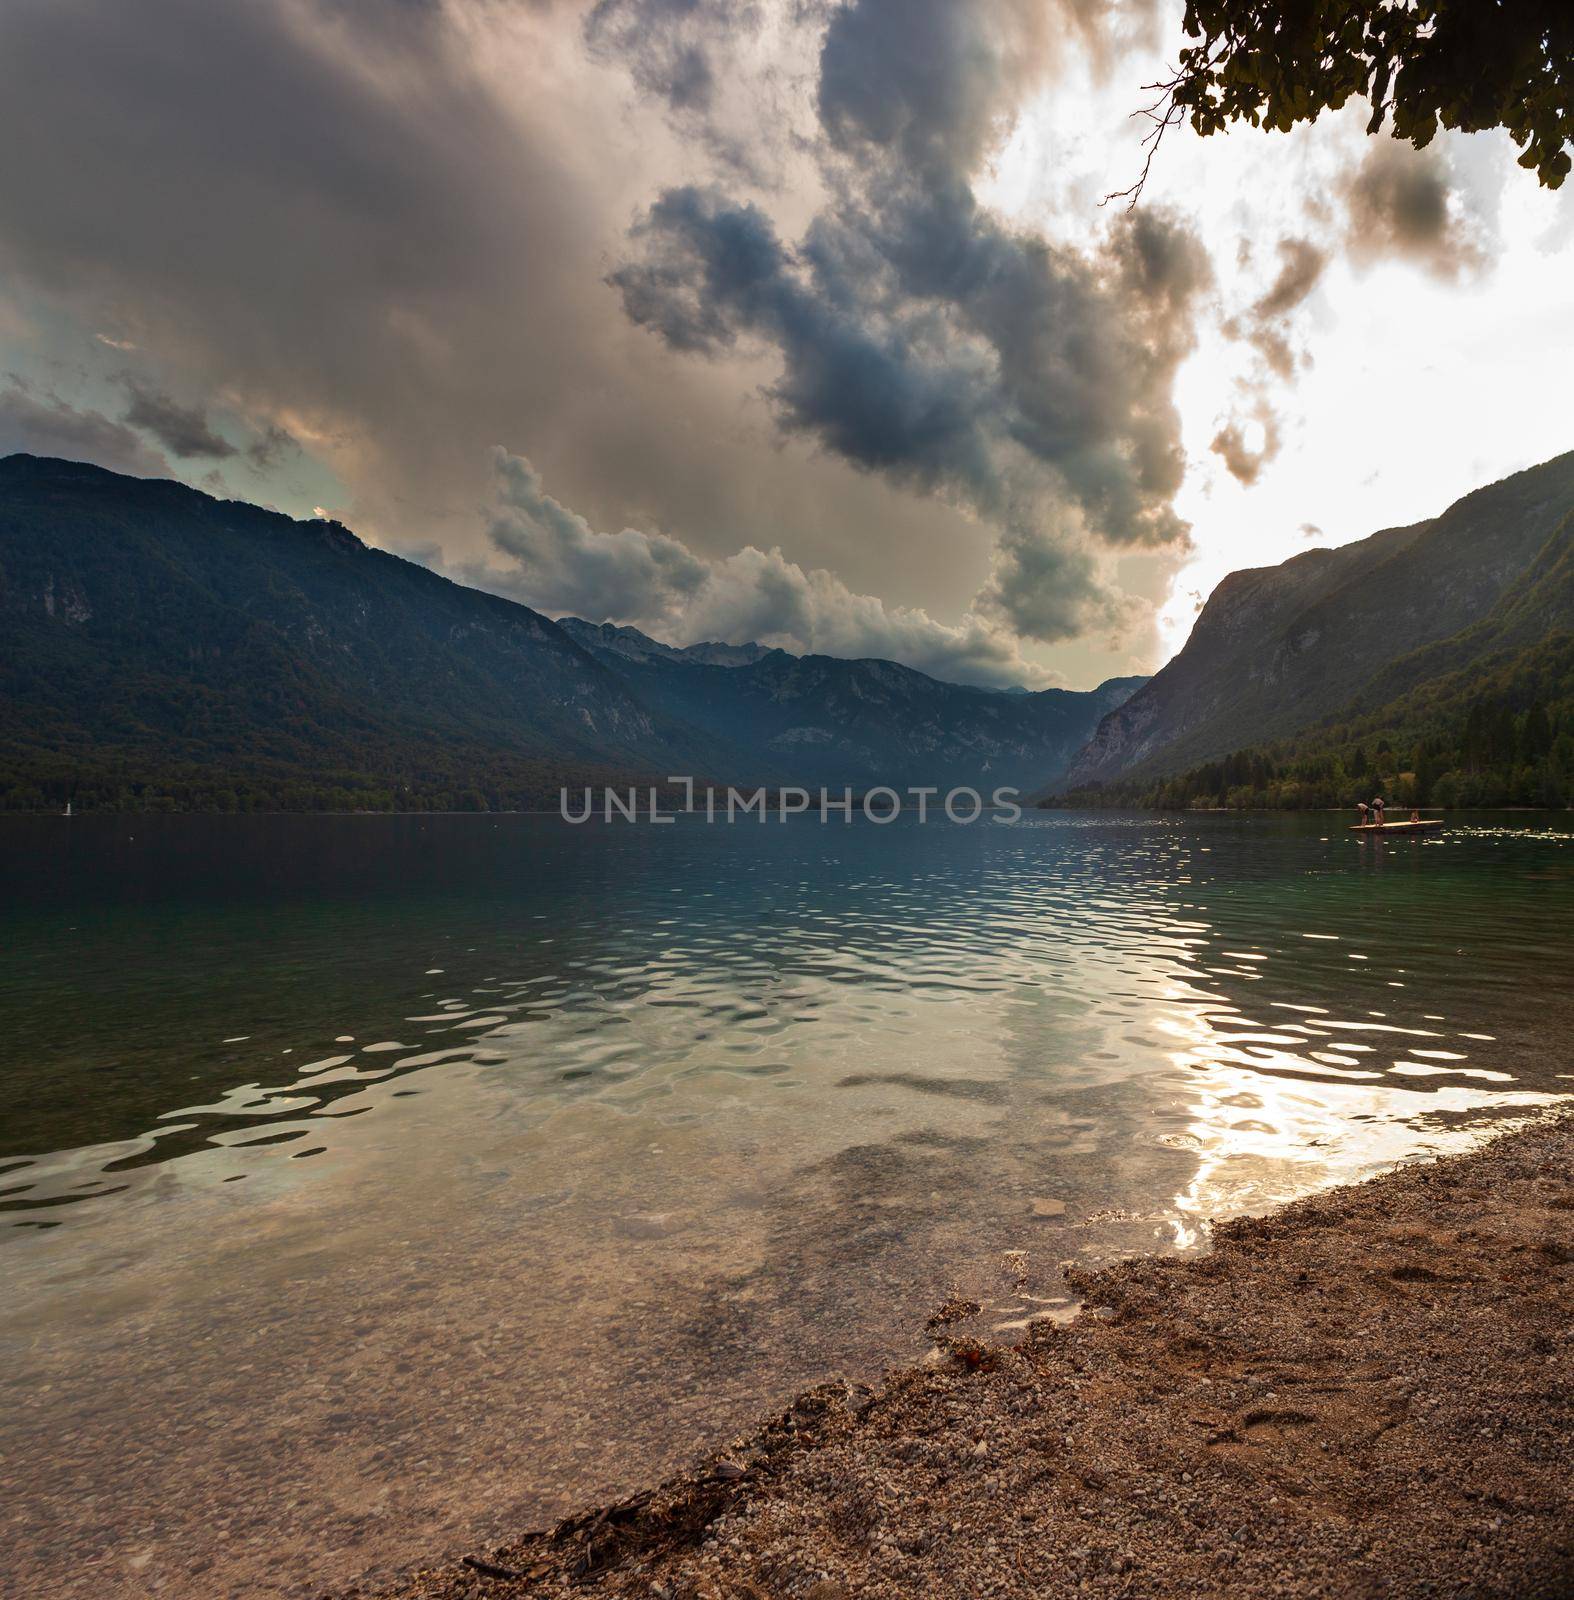 View of scenic Bohinj lake, the largest permanent lake in Slovenia, located within the Bohinj Valley of the Julian Alps